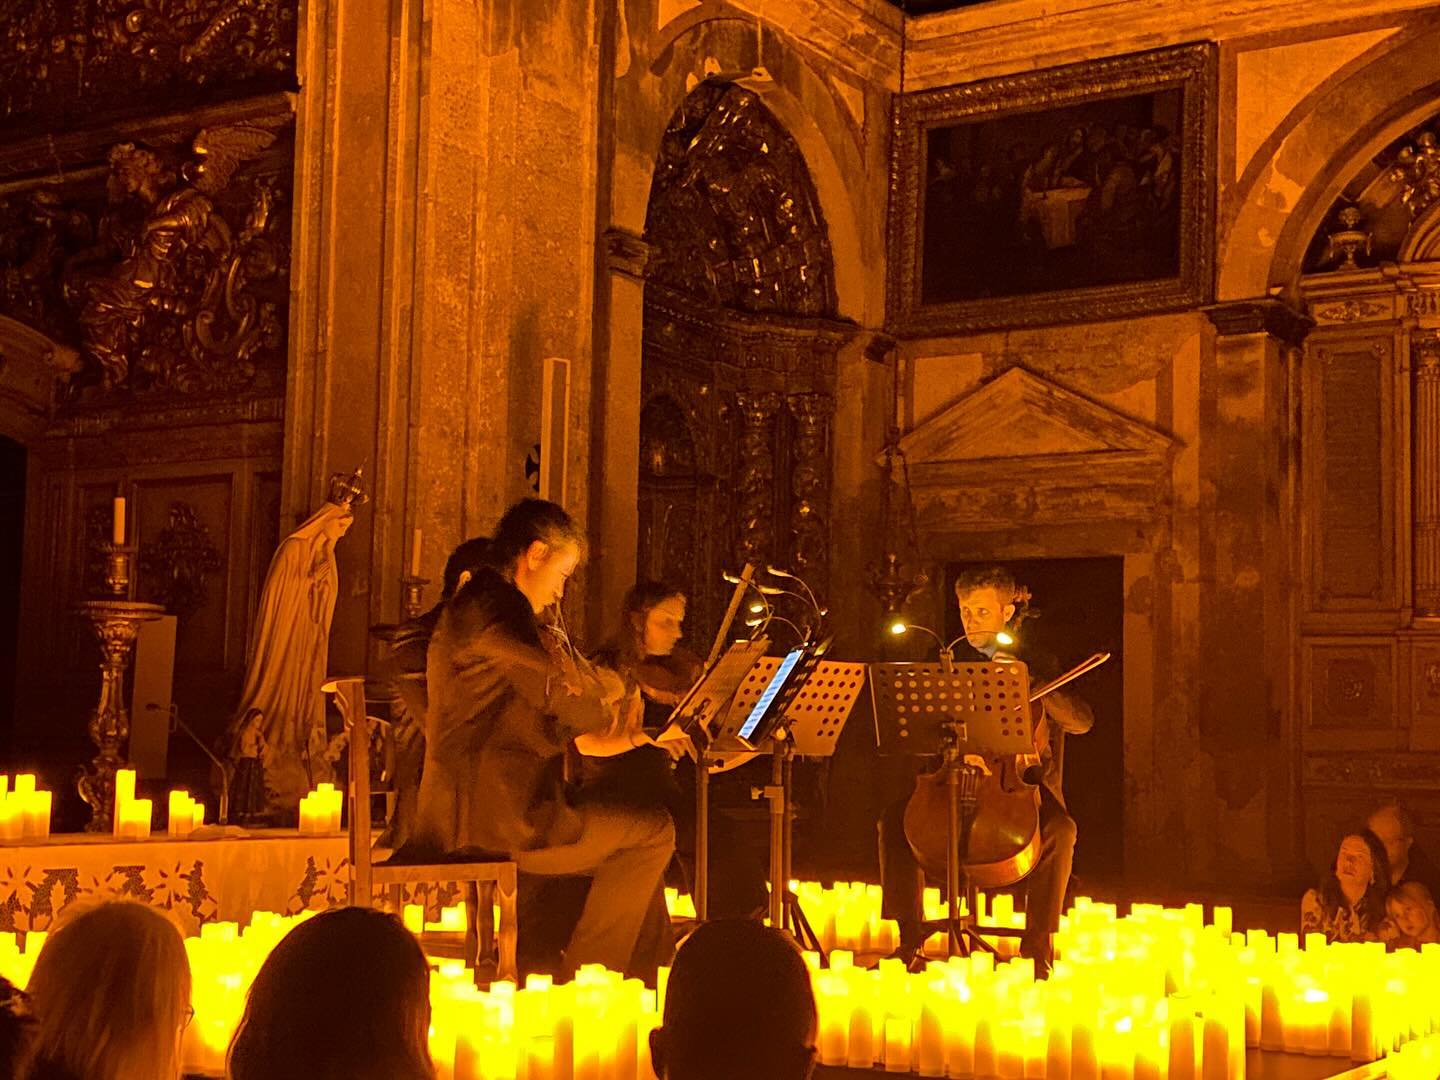 Went to see a concert by candlelight of Vivaldi 4 stations at the Igreja de Santa Catarina in Lisbon